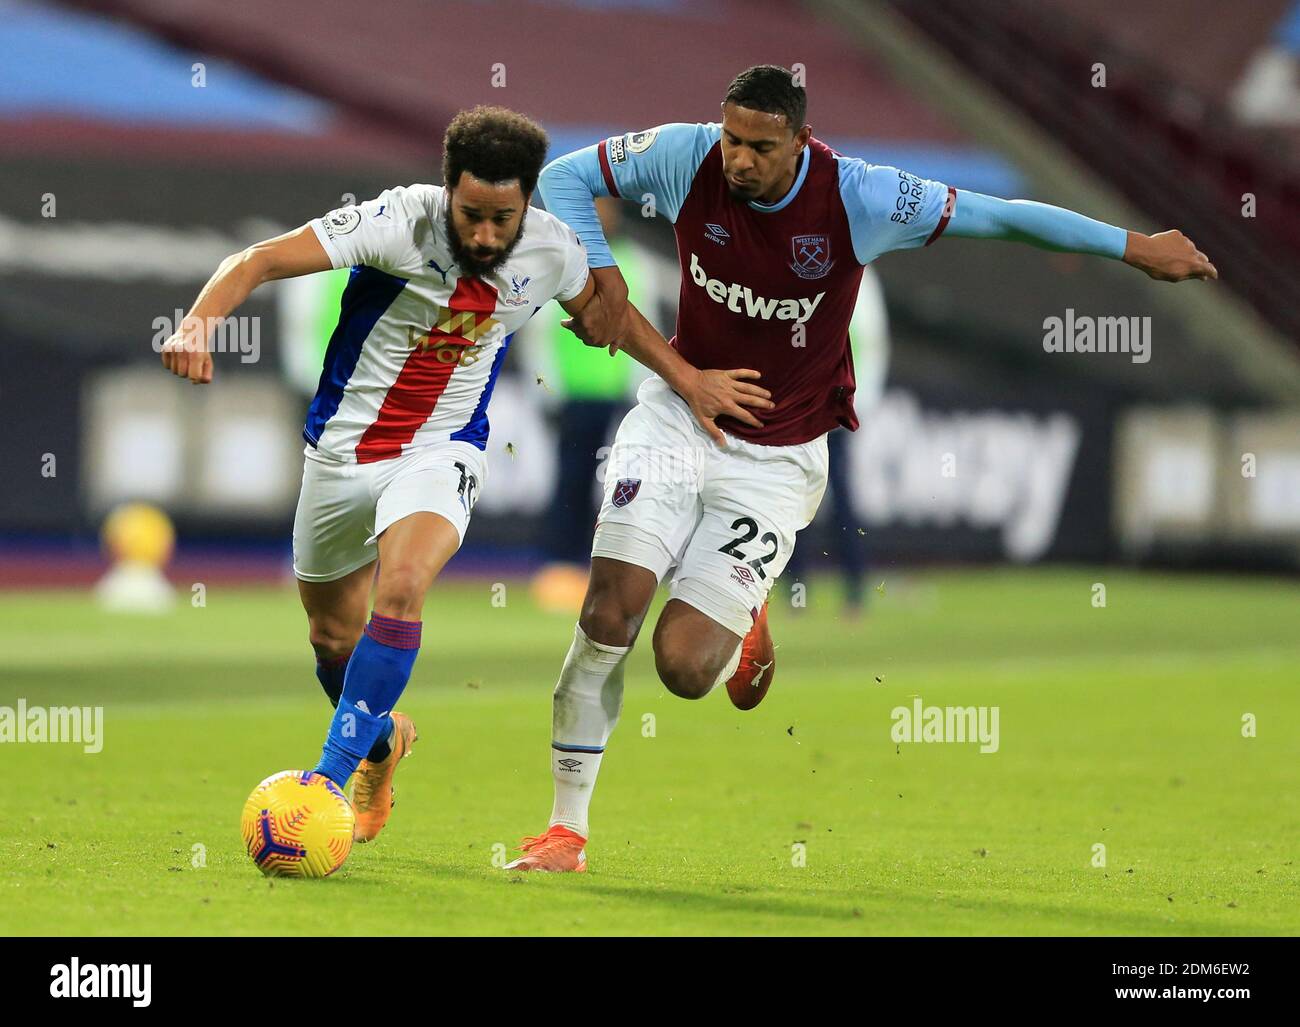 Crystal Palace's Andros Townsend and West Ham United's Sebastien Haller battle for the ball during the Premier League match at the London Stadium. Stock Photo